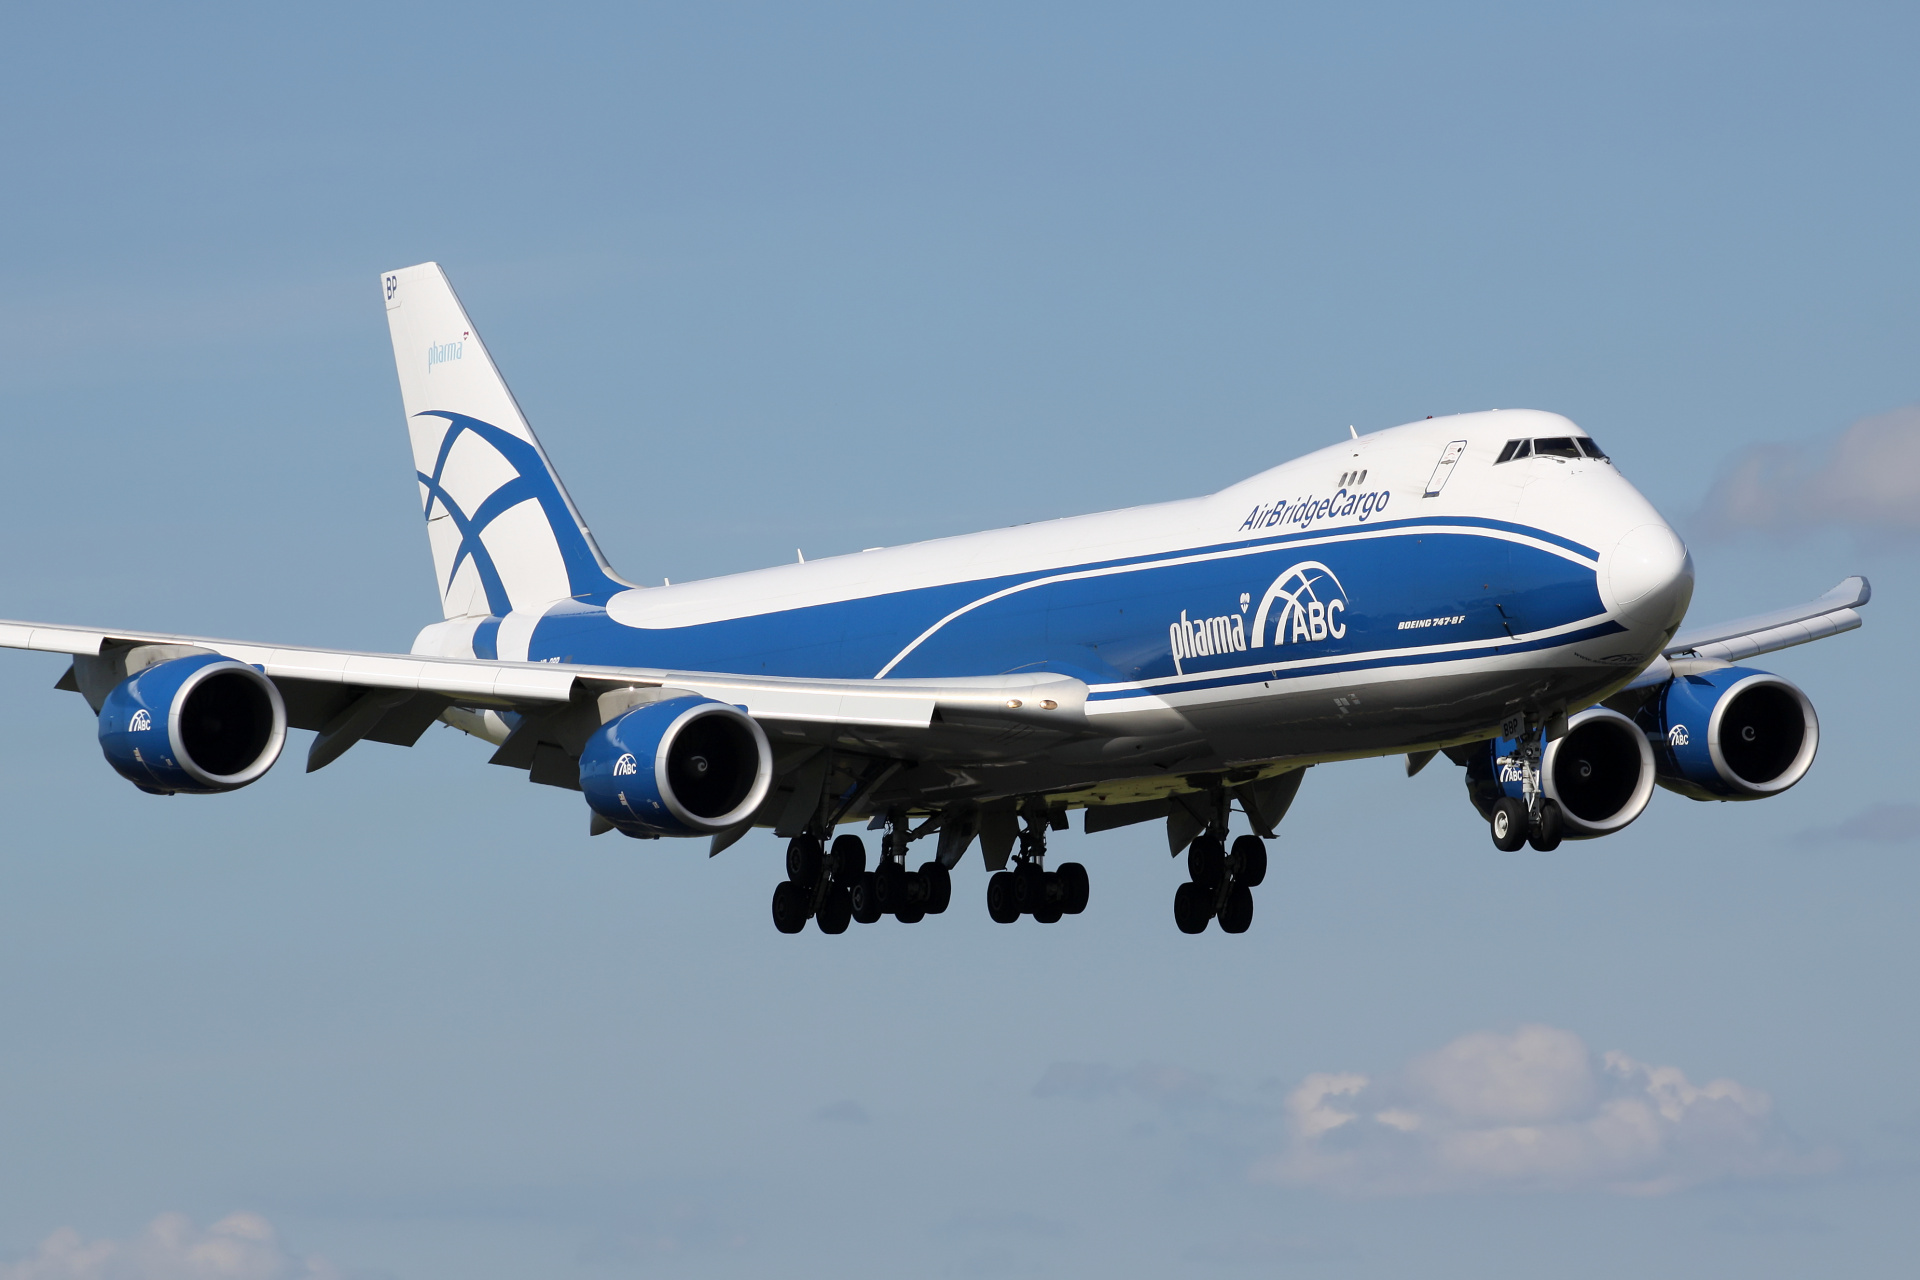 VQ-BBP (ABC Pharma livery) (Aircraft » Schiphol Spotting » Boeing 747-8F » AirBridgeCargo Airlines)